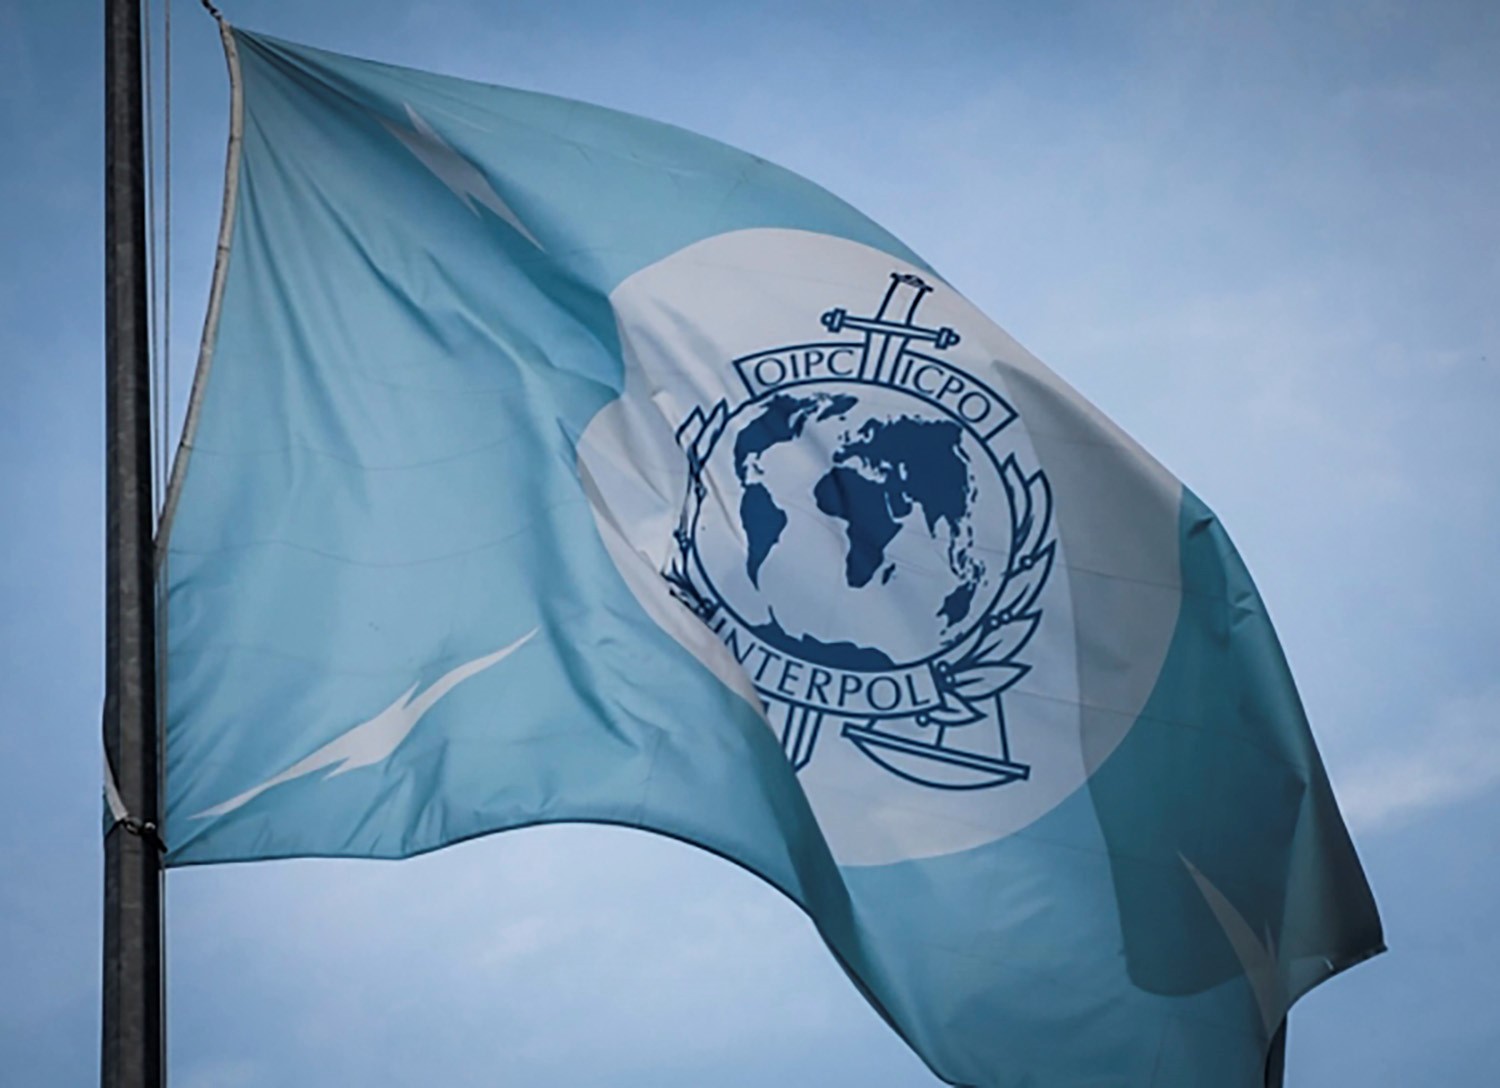 Interpol blue and white flag in salo. It has a light blue background with an emblem in the center and four lightning bolts symbolizing telecommunications and speed in policing.